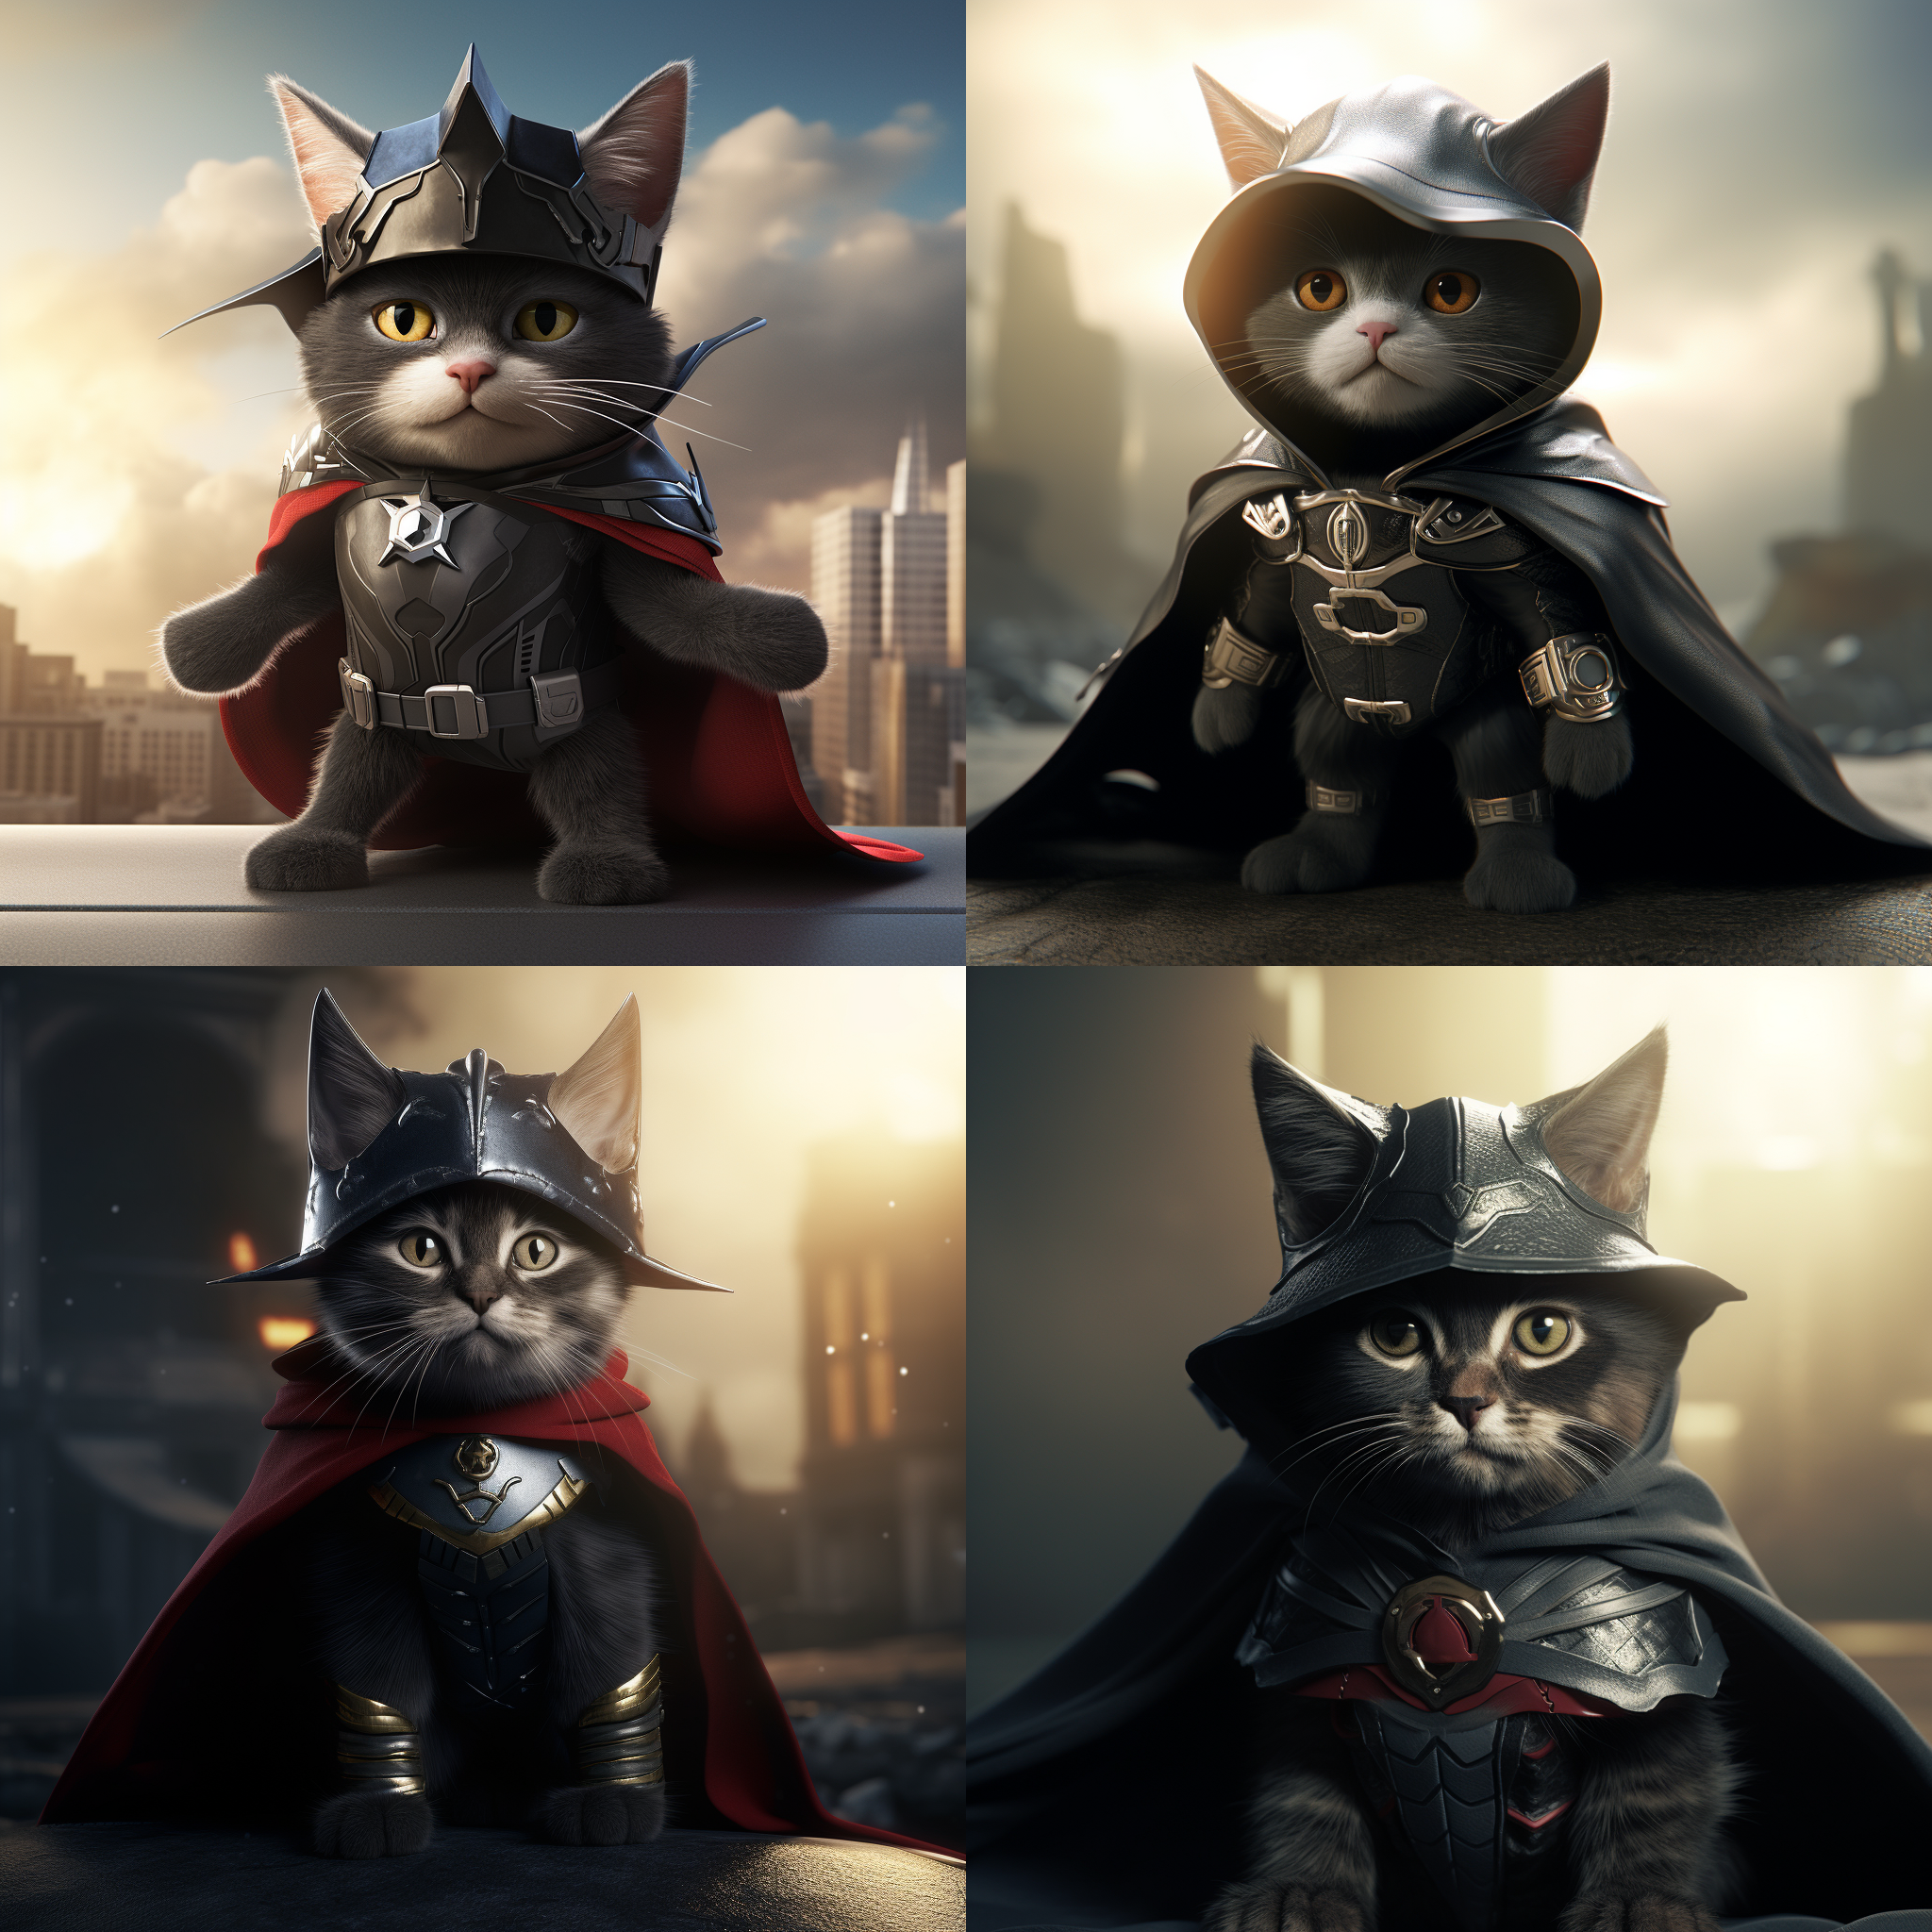 A superhero cat donning a caped crusader's hat, ready to save the day